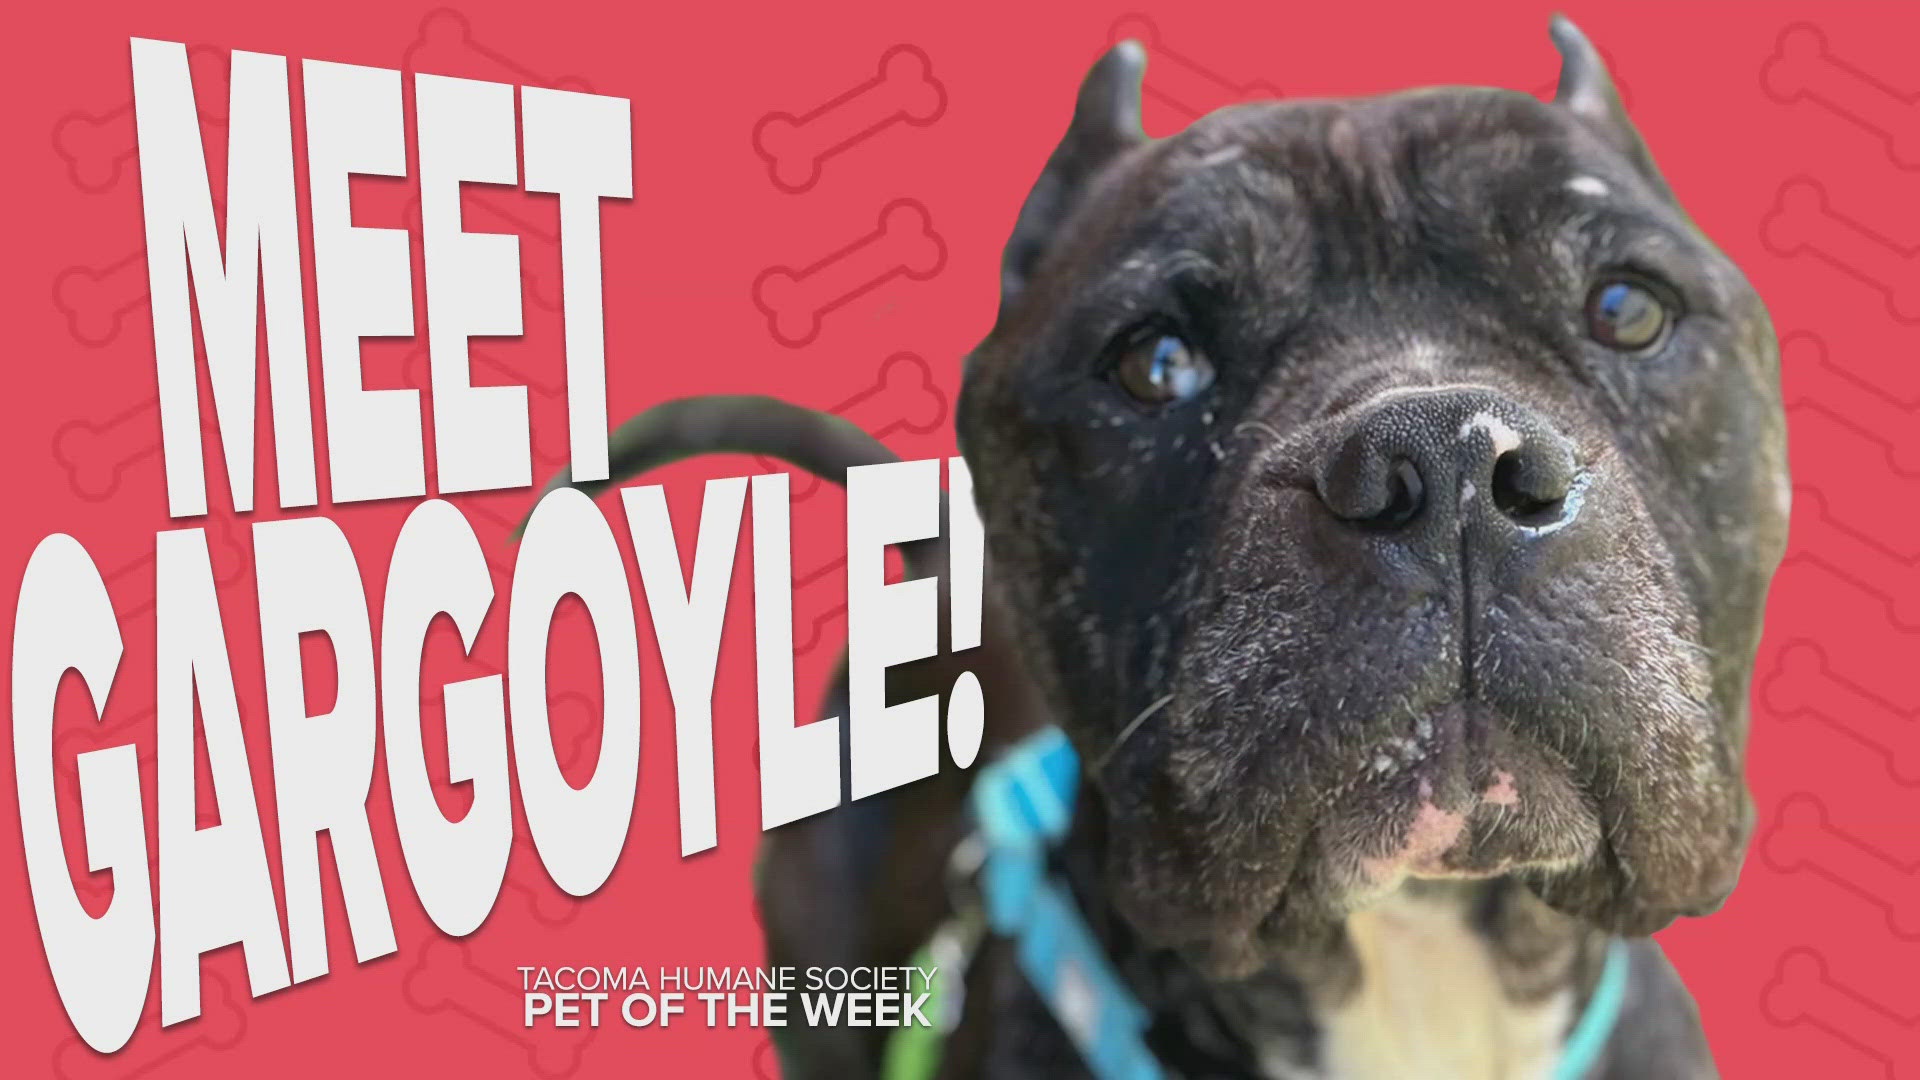 This week's featured adoptable pet is Gargoyle